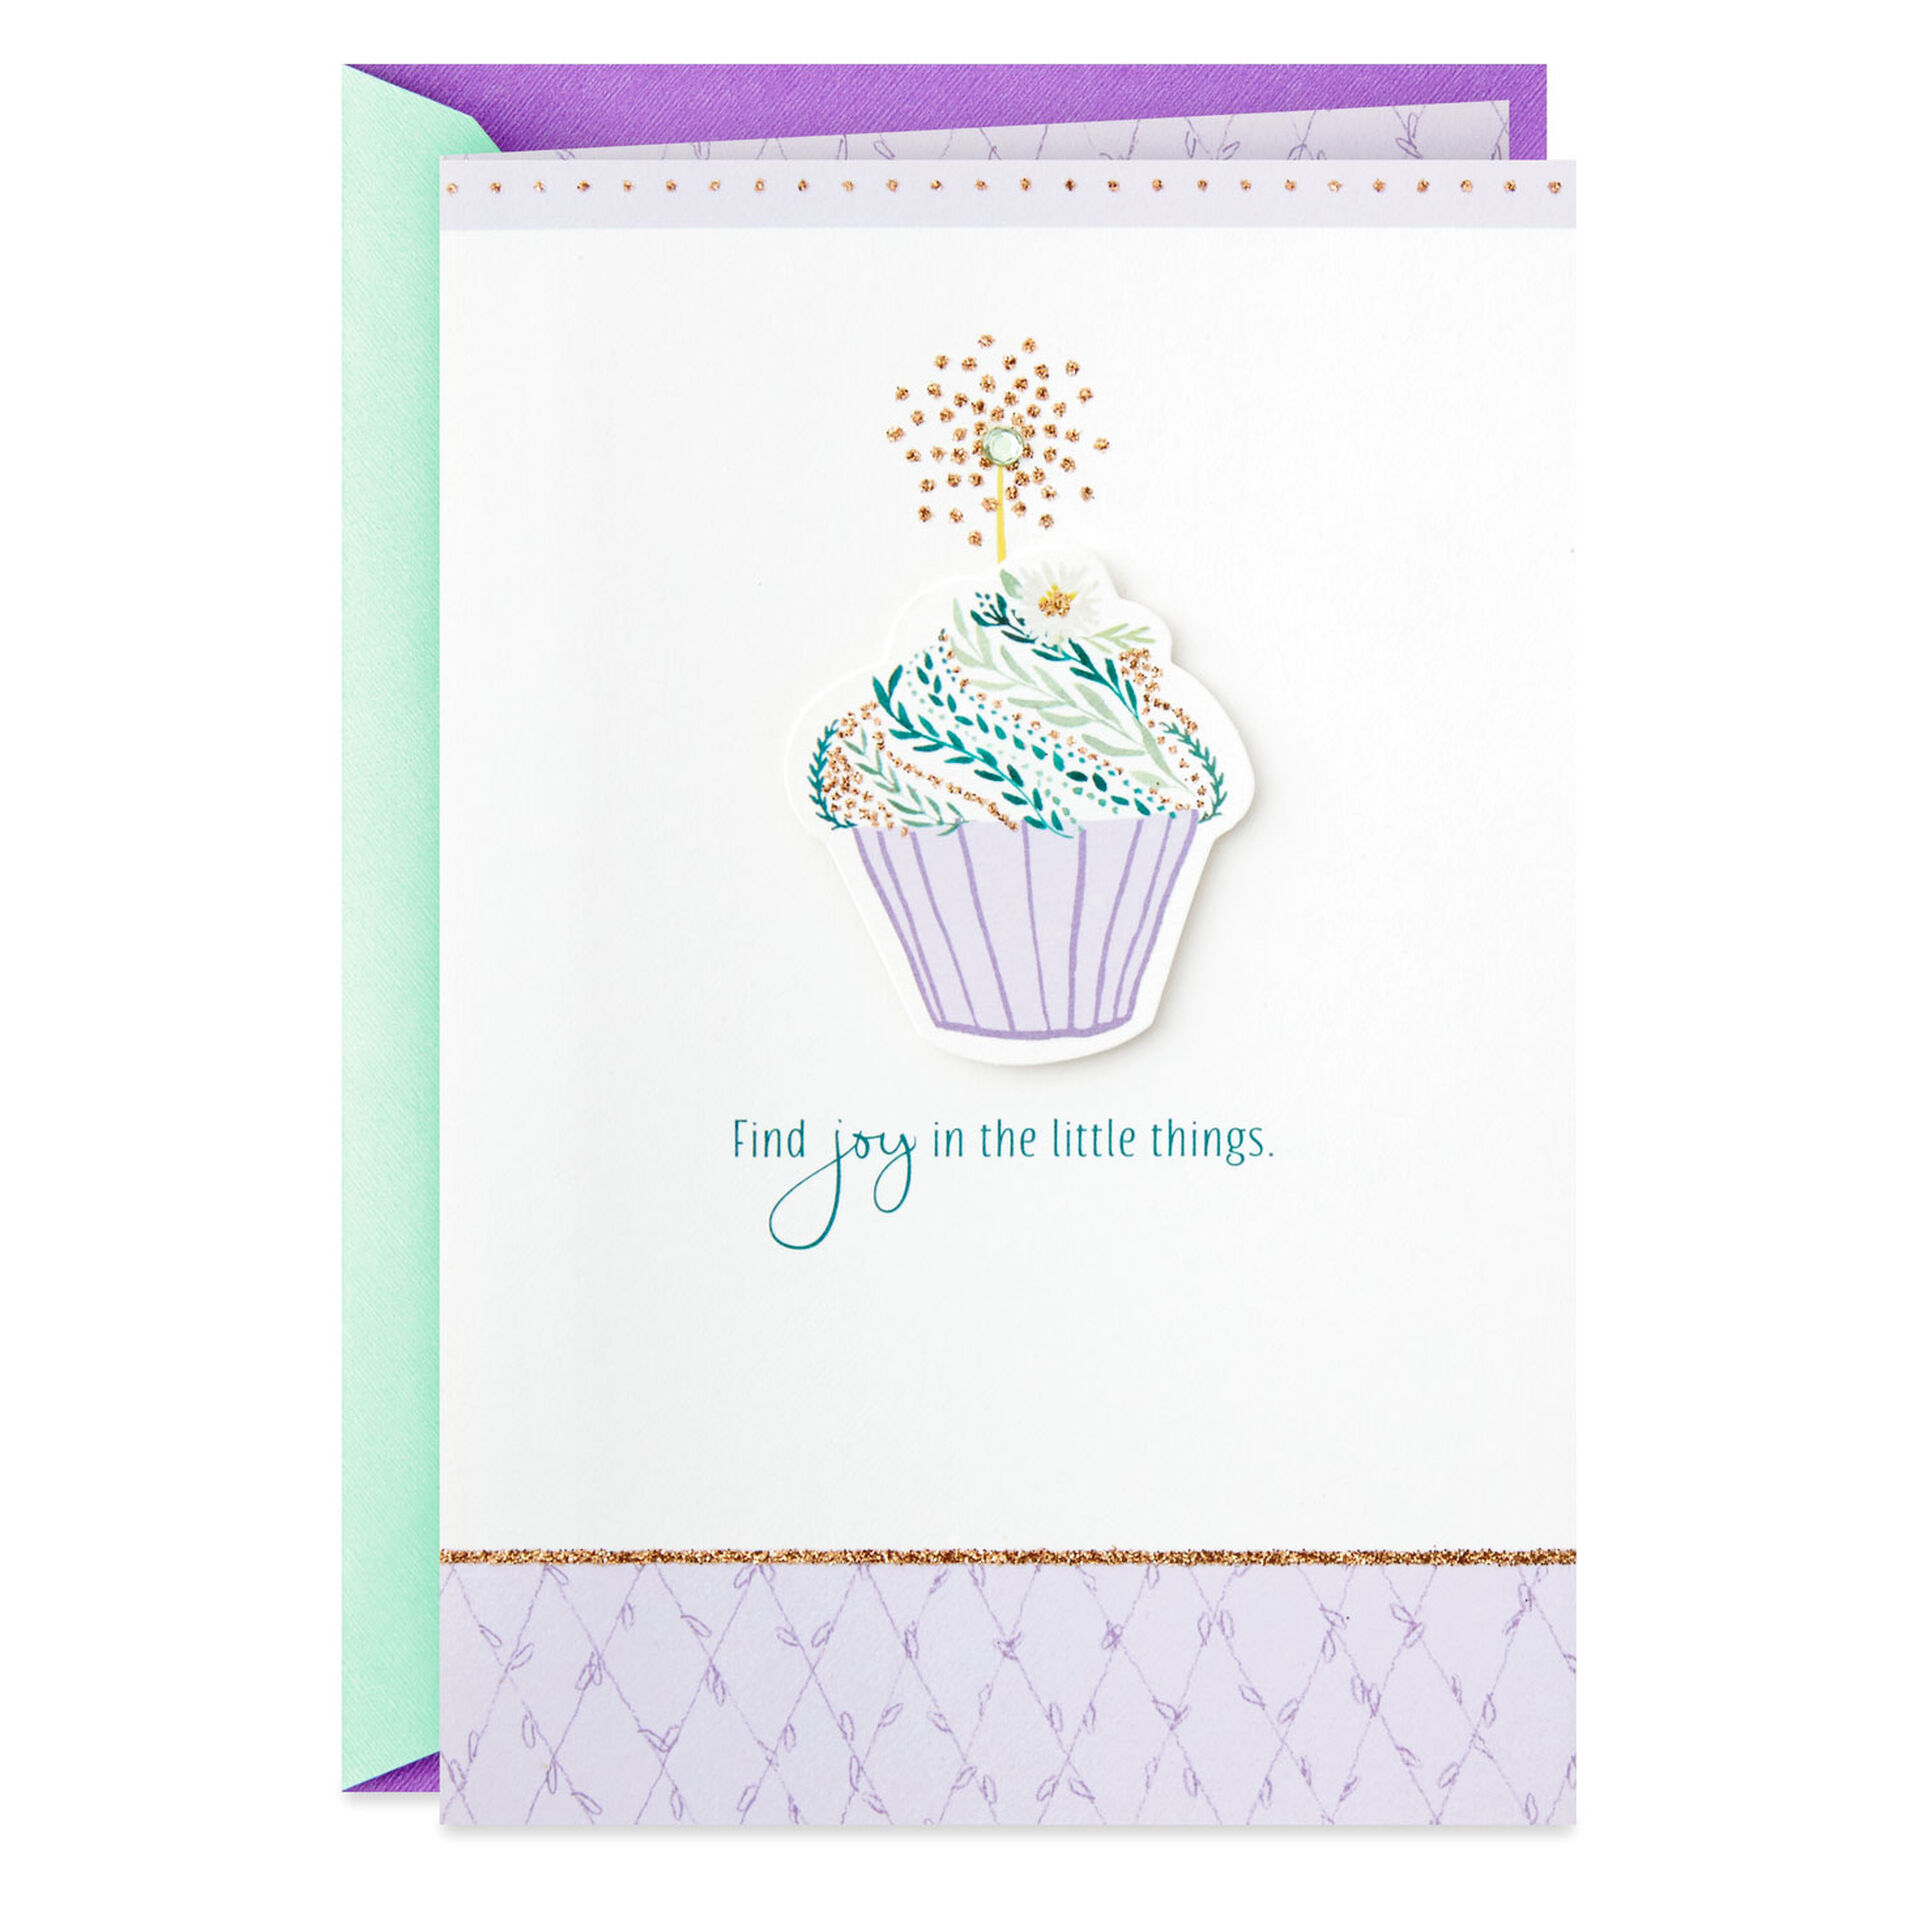 Cupcake-with-Vines-Birthday-Card-for-Her_599HBD3299_01